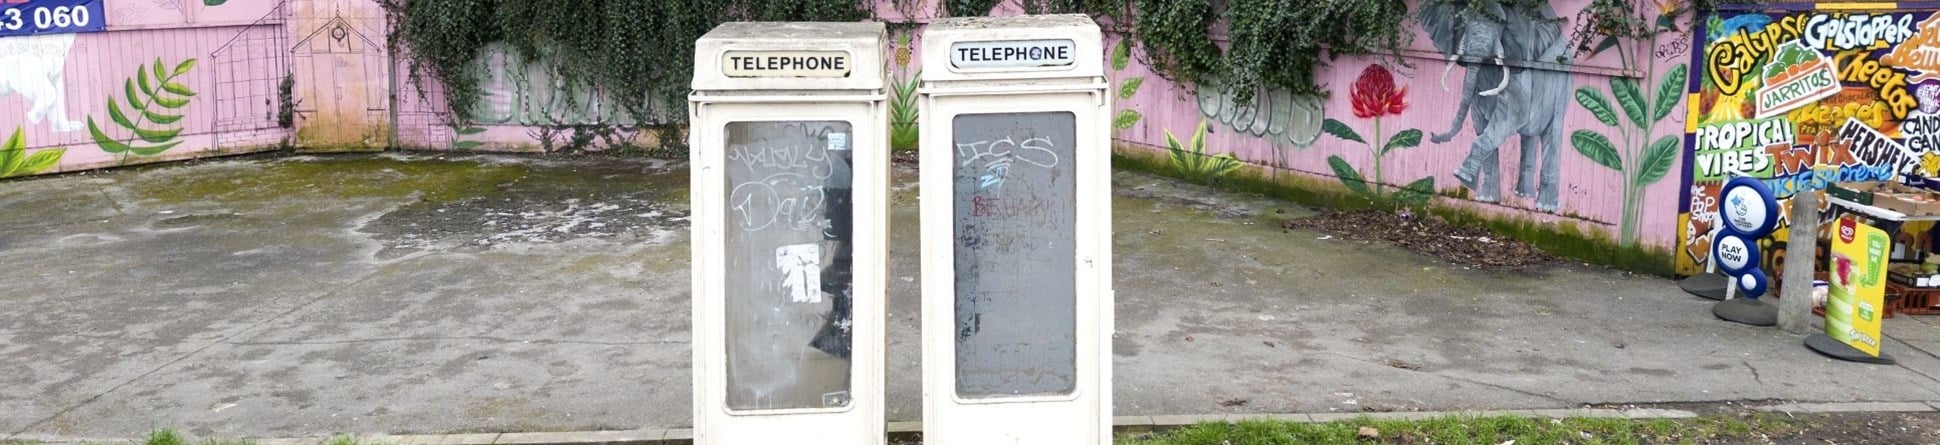 Two cream coloured phone boxes side by side. 